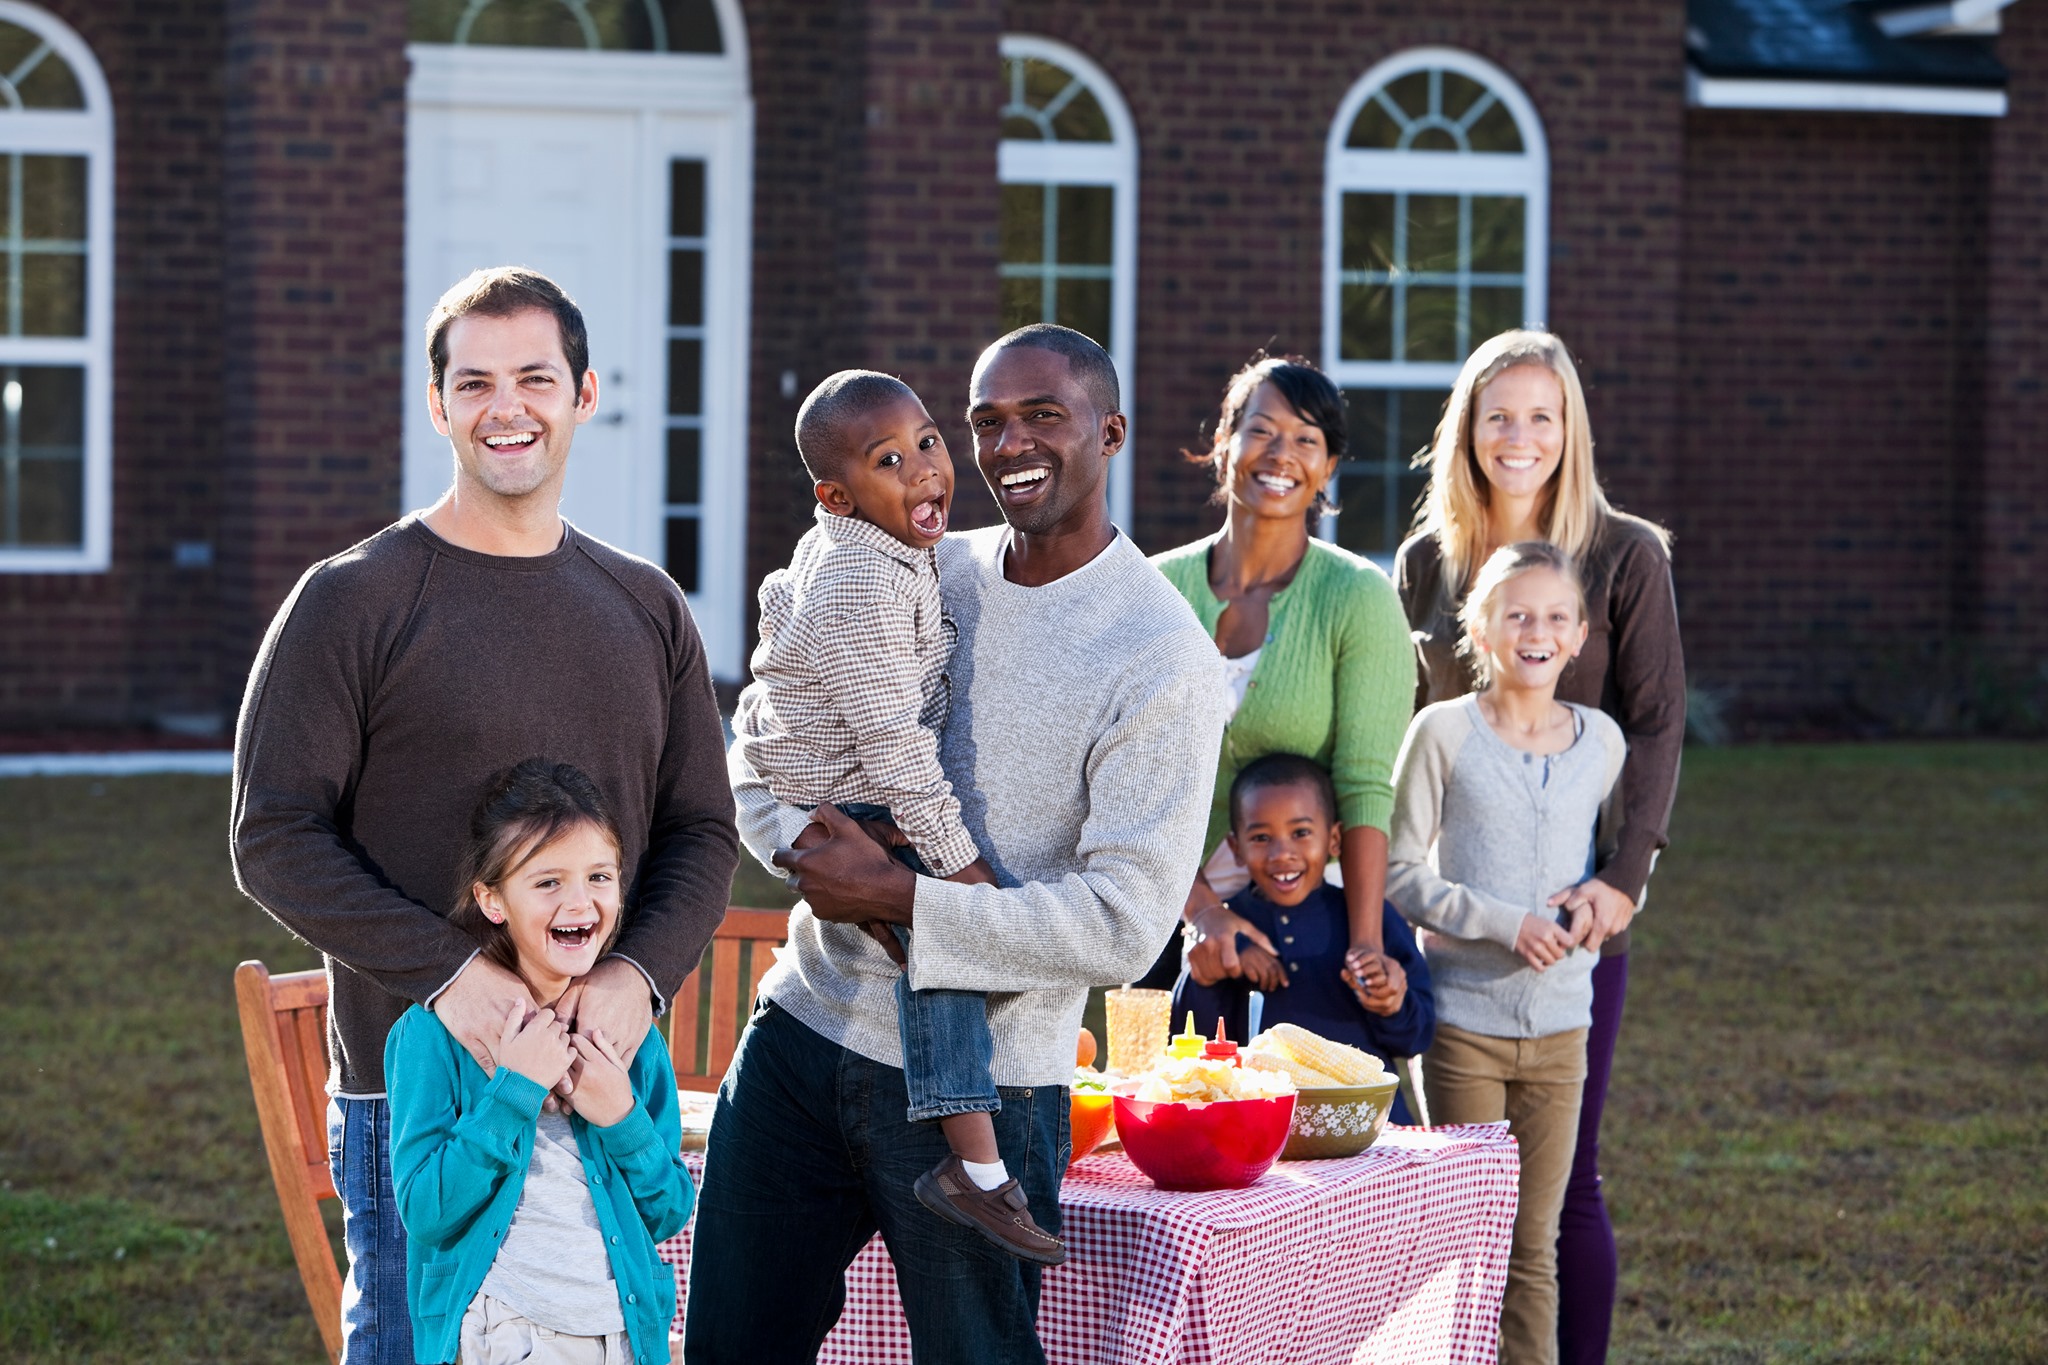 multiracial families and neighbors smiling at outdoor picnic